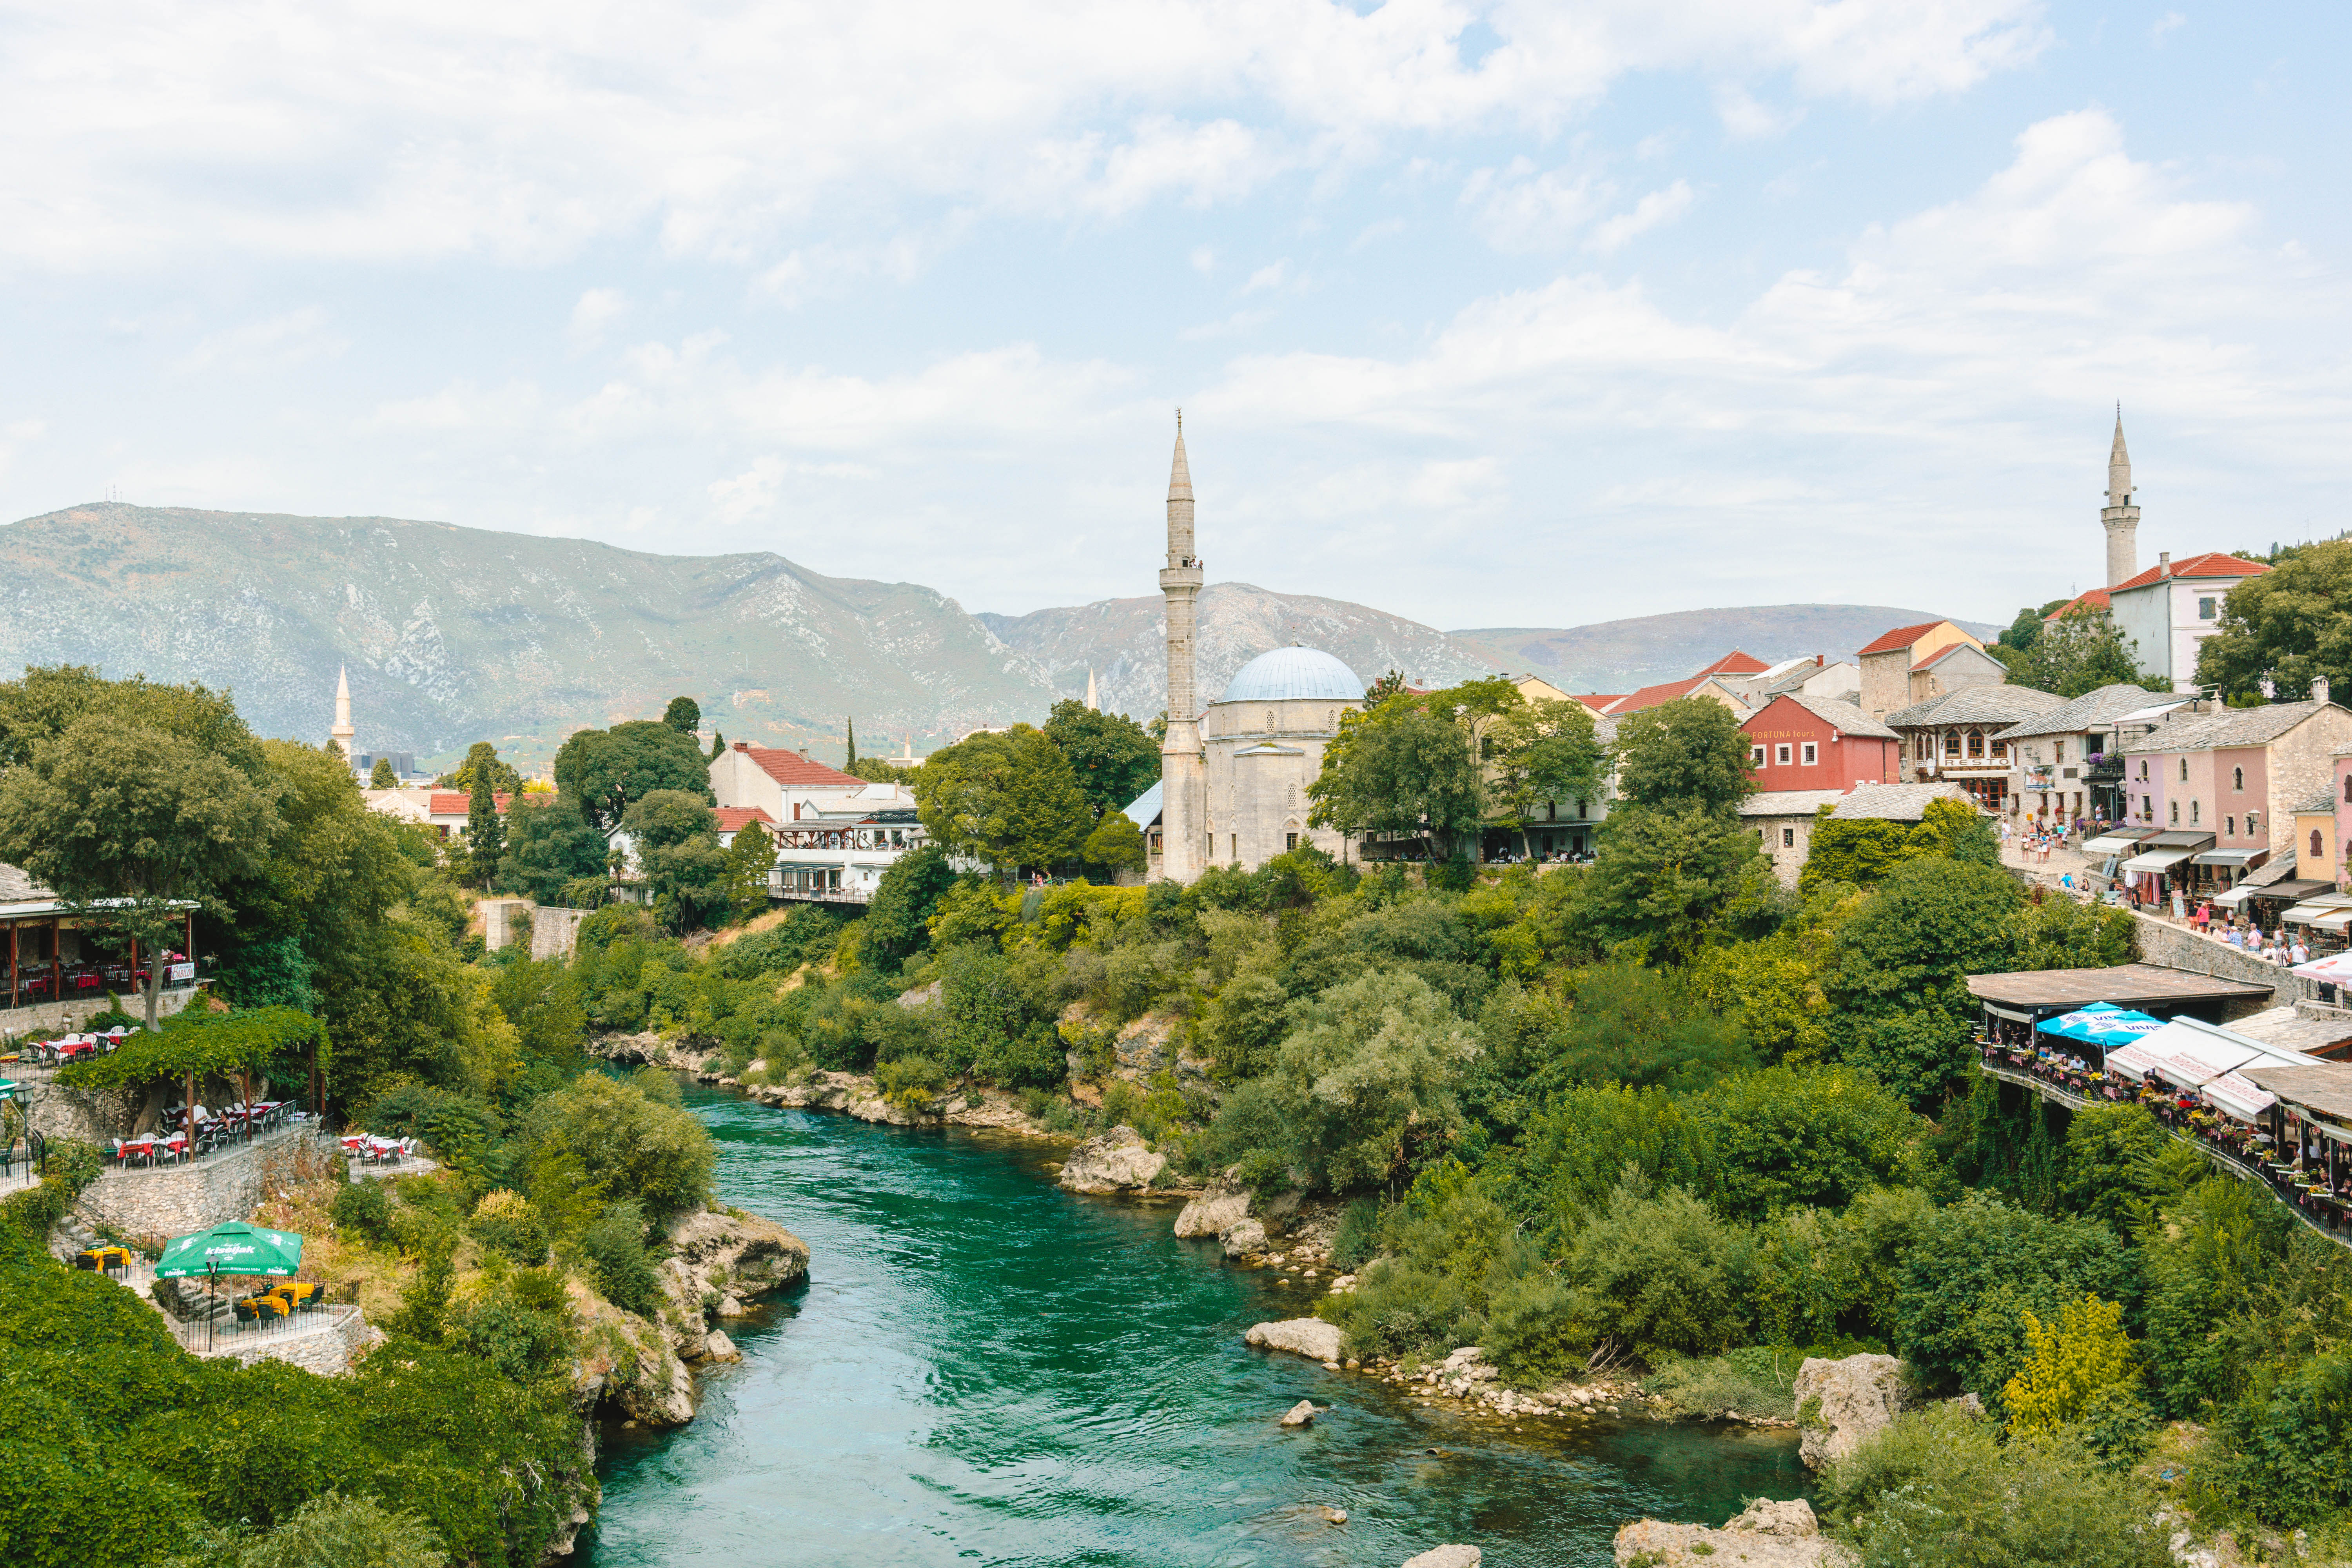 A scenic view of Mostar, Bosnia and Herzegovina, showcasing the Neretva River winding through the town. The landscape is dotted with historic buildings, including a prominent mosque with a tall minaret and a dome. The lush greenery along the riverbank and the surrounding hills create a picturesque setting under a partly cloudy sky.